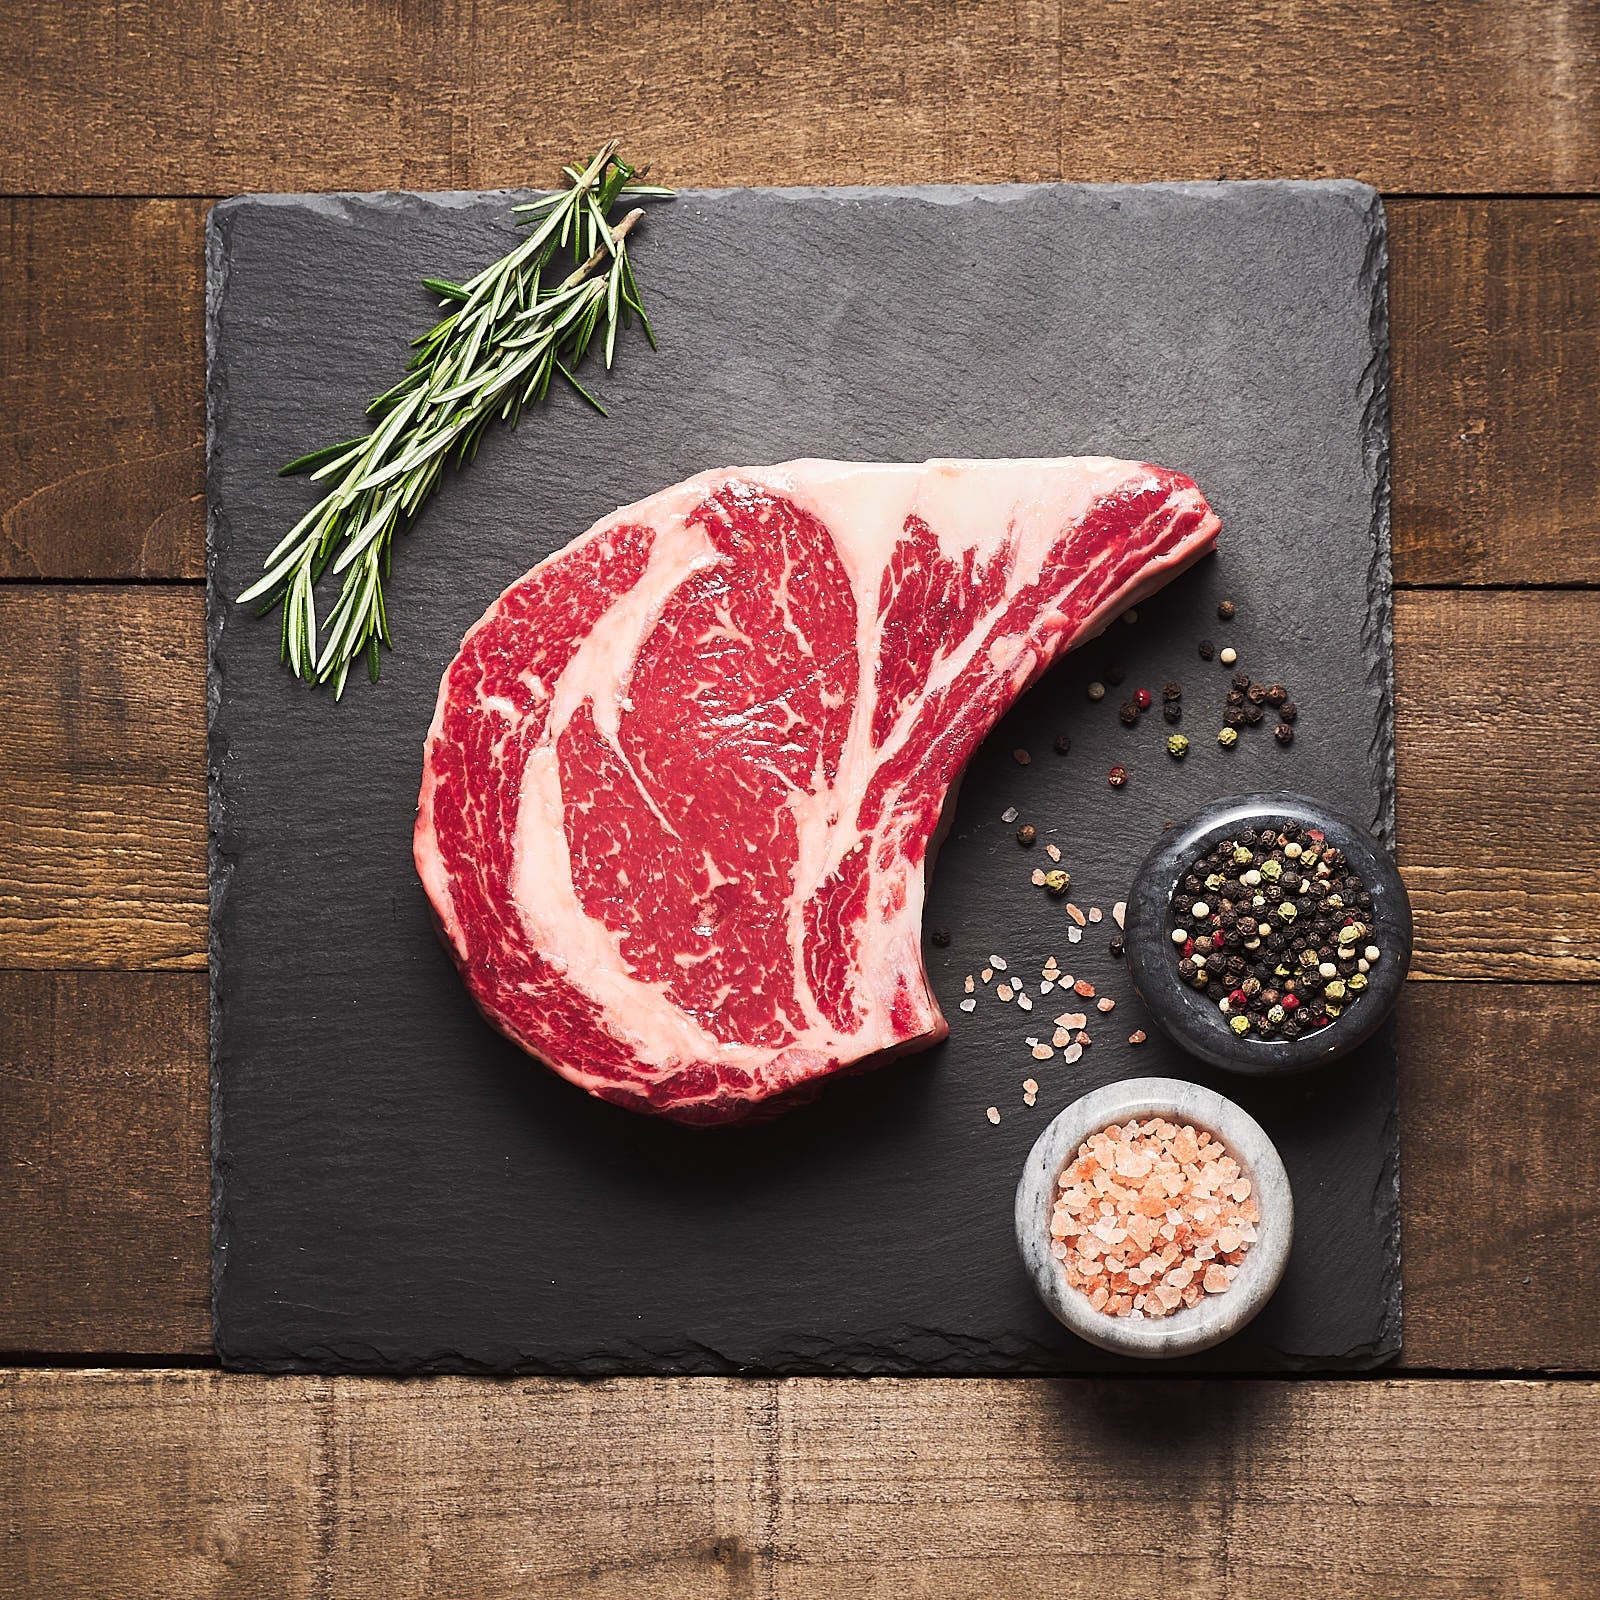 Well-marbled ribeye beside pink Himalayan salt, pepper, and rosemary